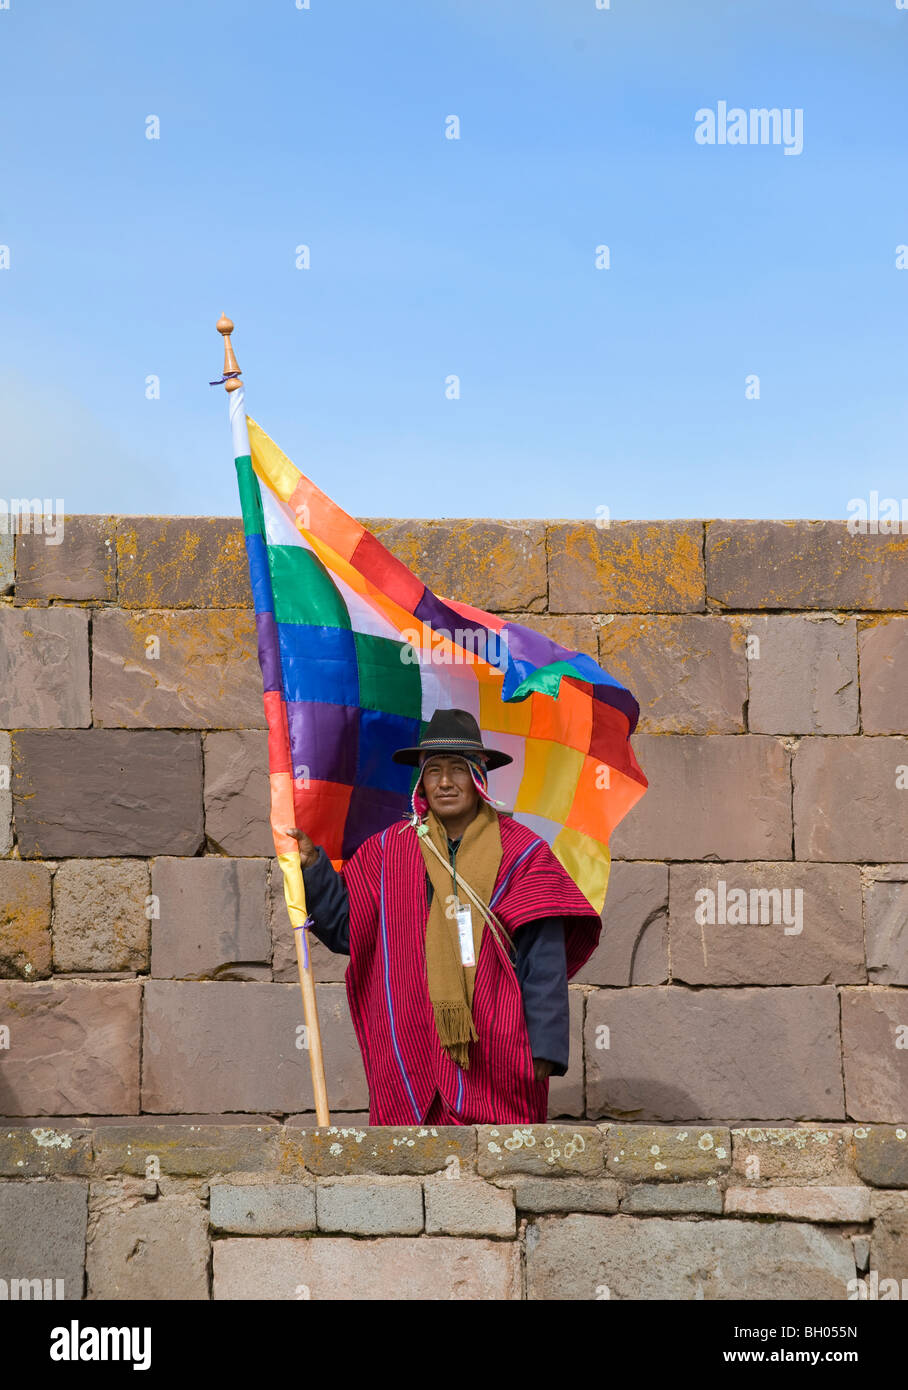 Tiwanaku temple, ceremony of Evo Morales Ayma second presidential assumption, Bolivia. Man with traditional dressing and flag. Stock Photo